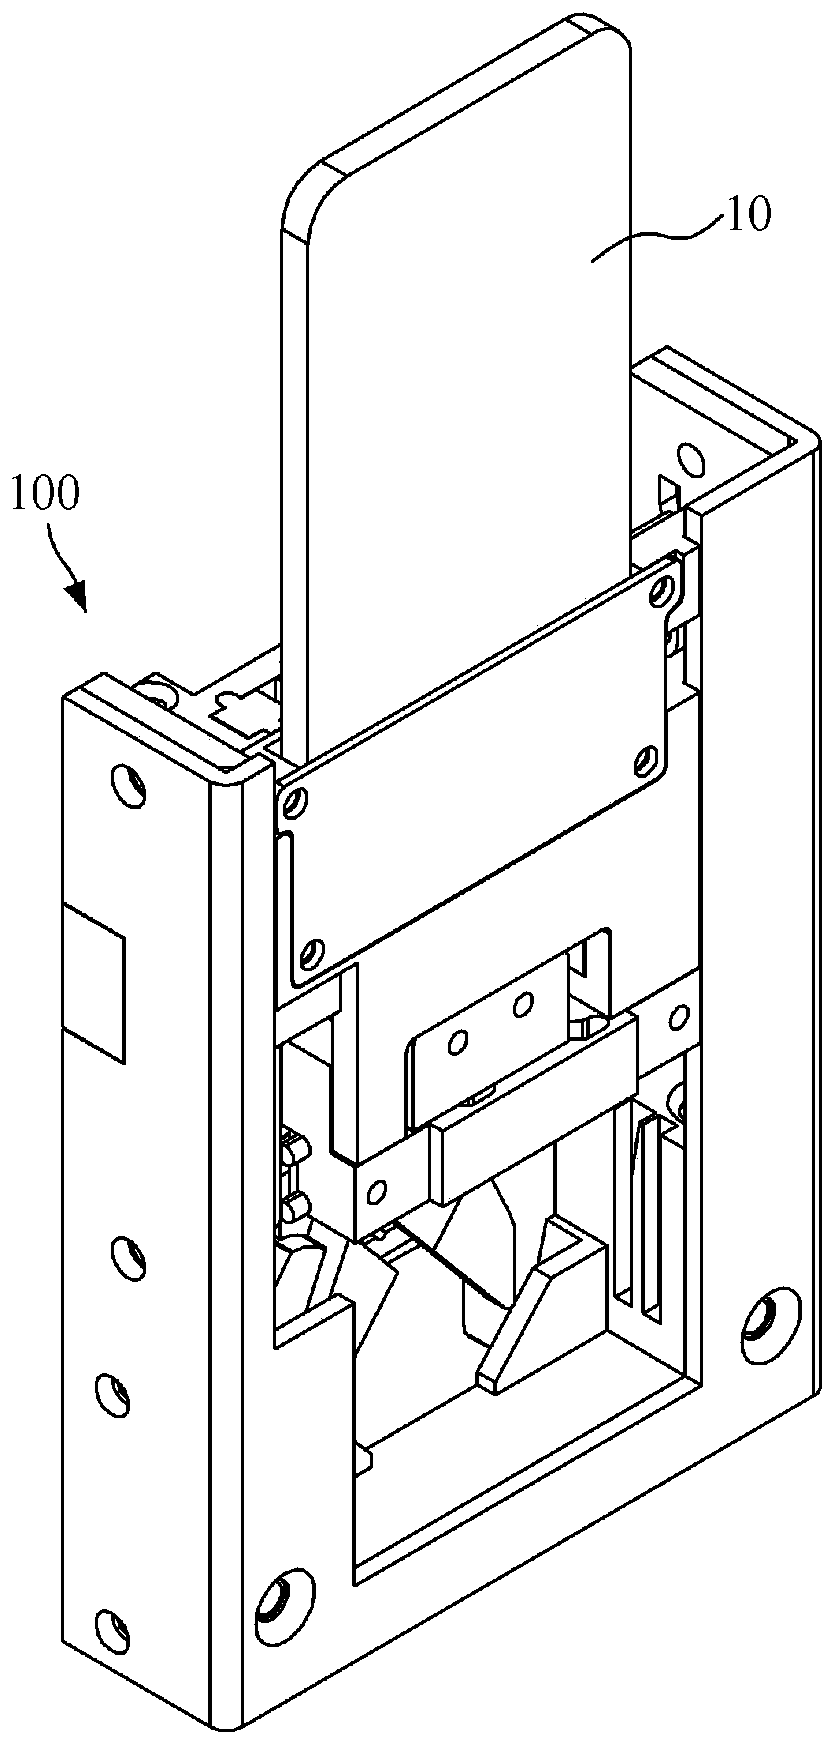 Punched card key push-type door lock